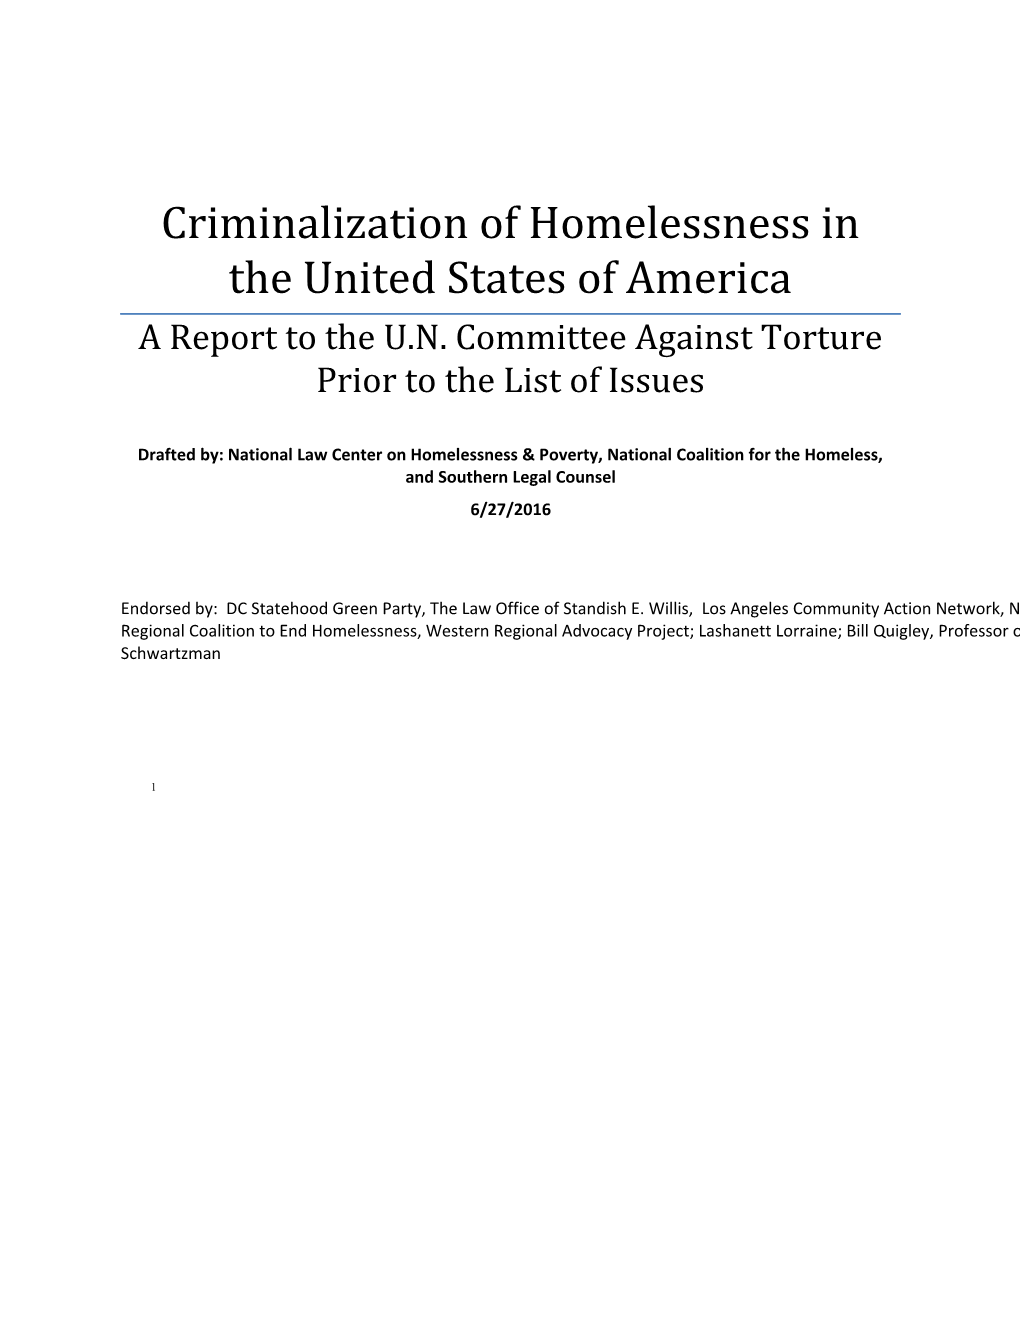 Criminalization of Homelessness in the United States of America